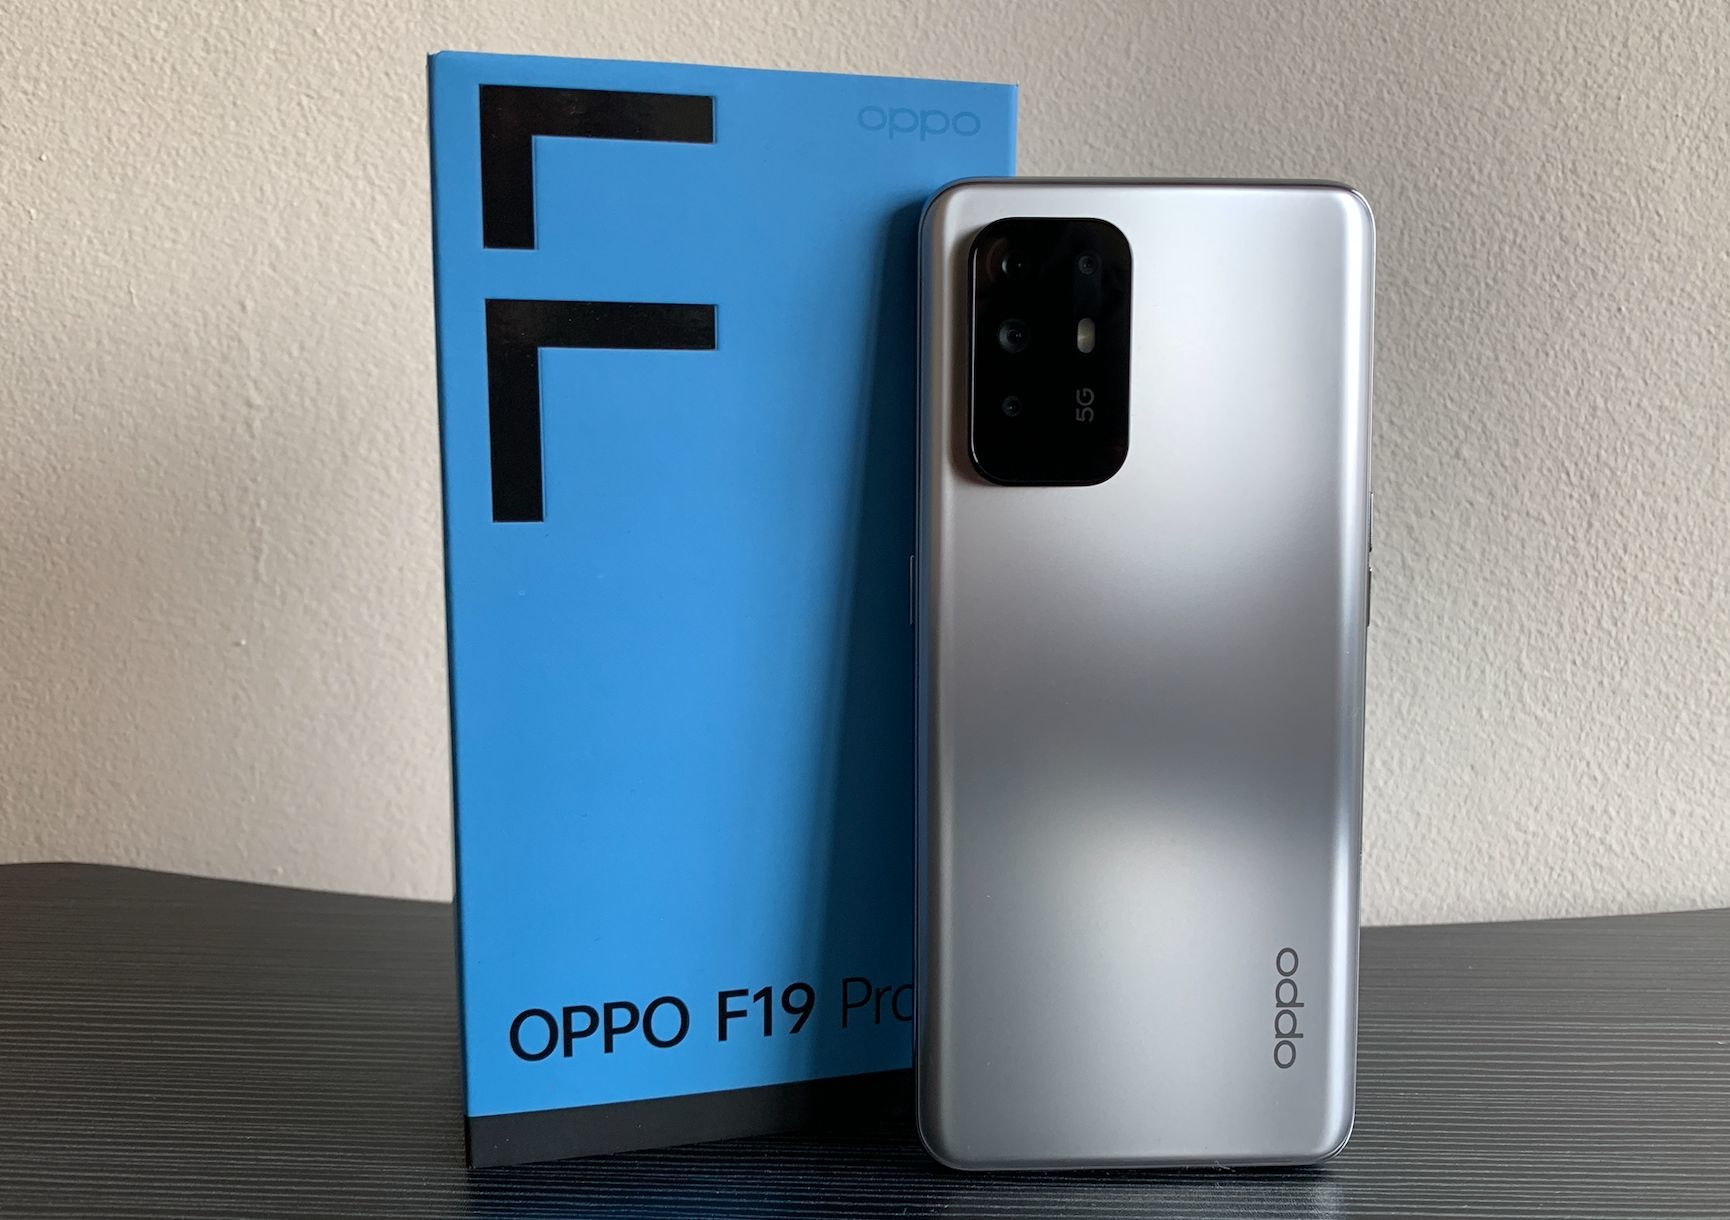 Oppo F19 Pro, F19 Pro+ 5G launched in India: Price, specs and all